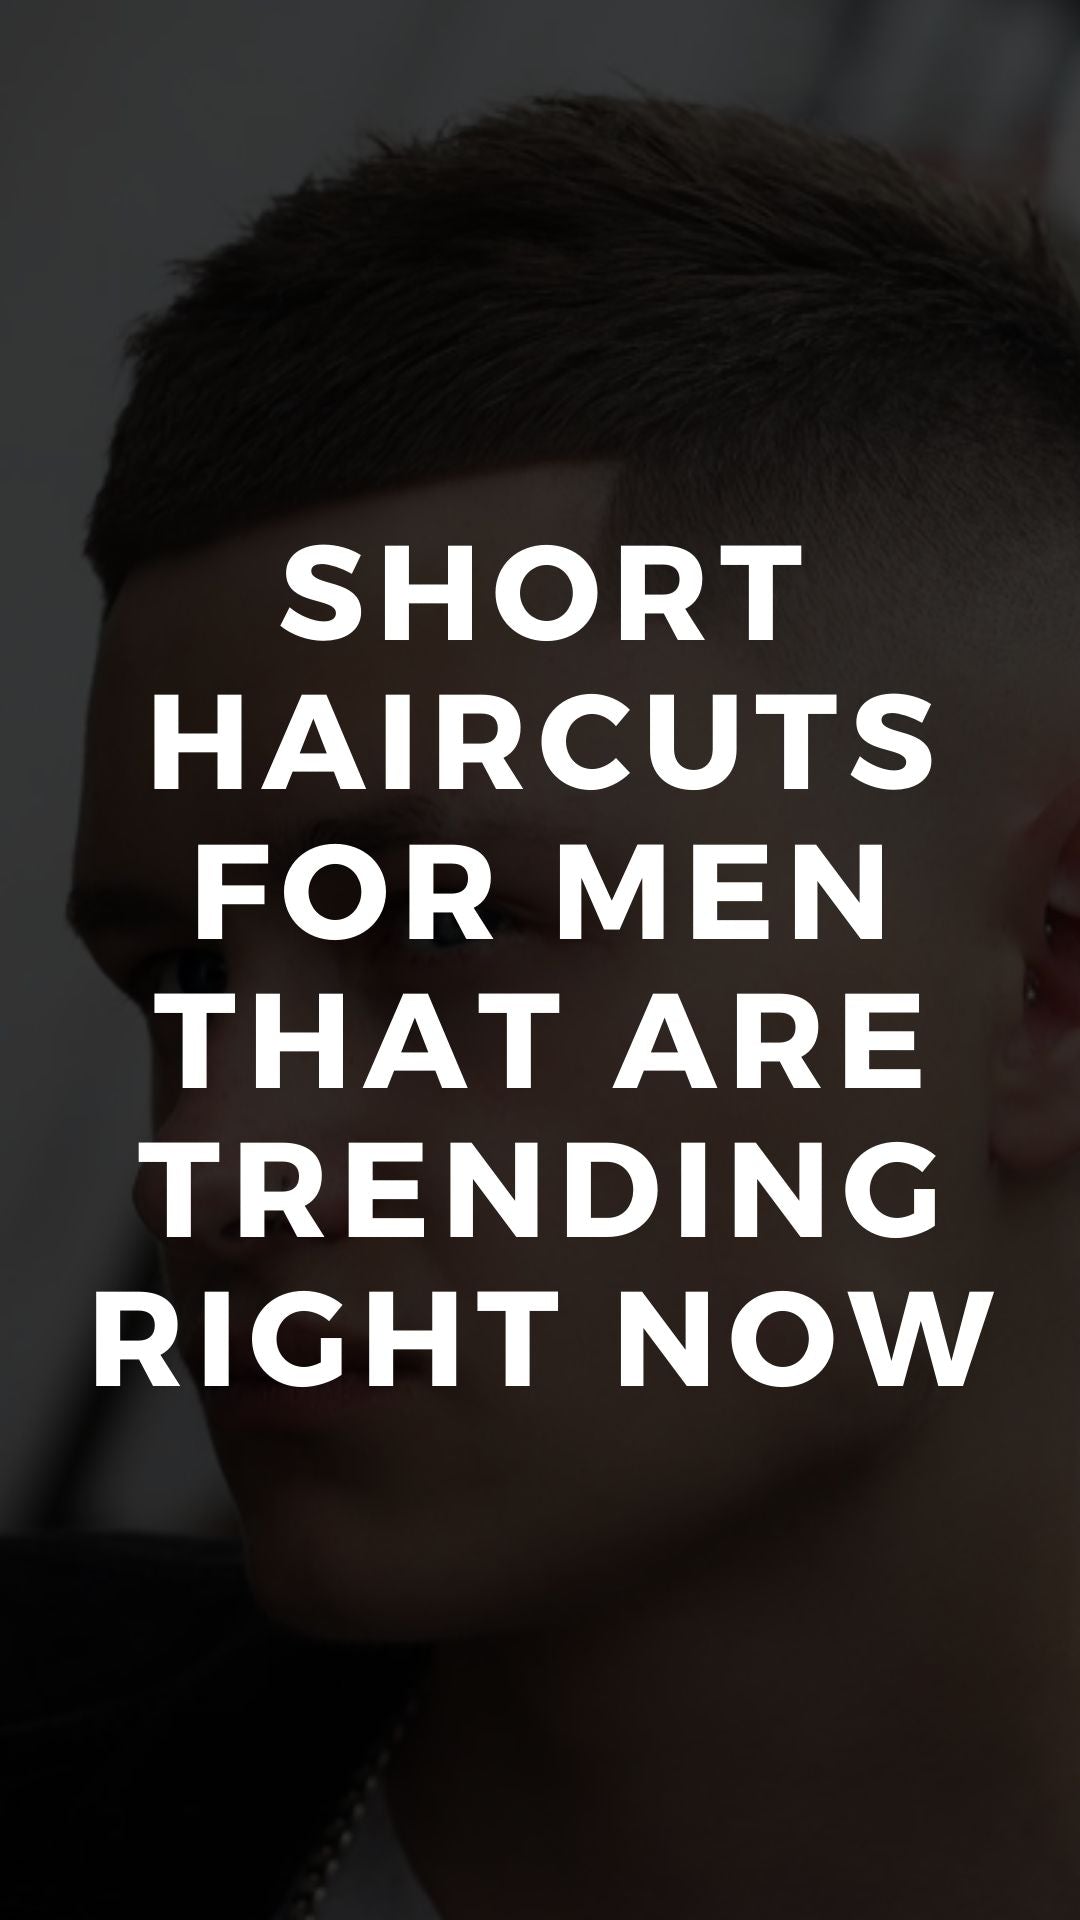 Short Haircuts for Men That Are Trending Right Now